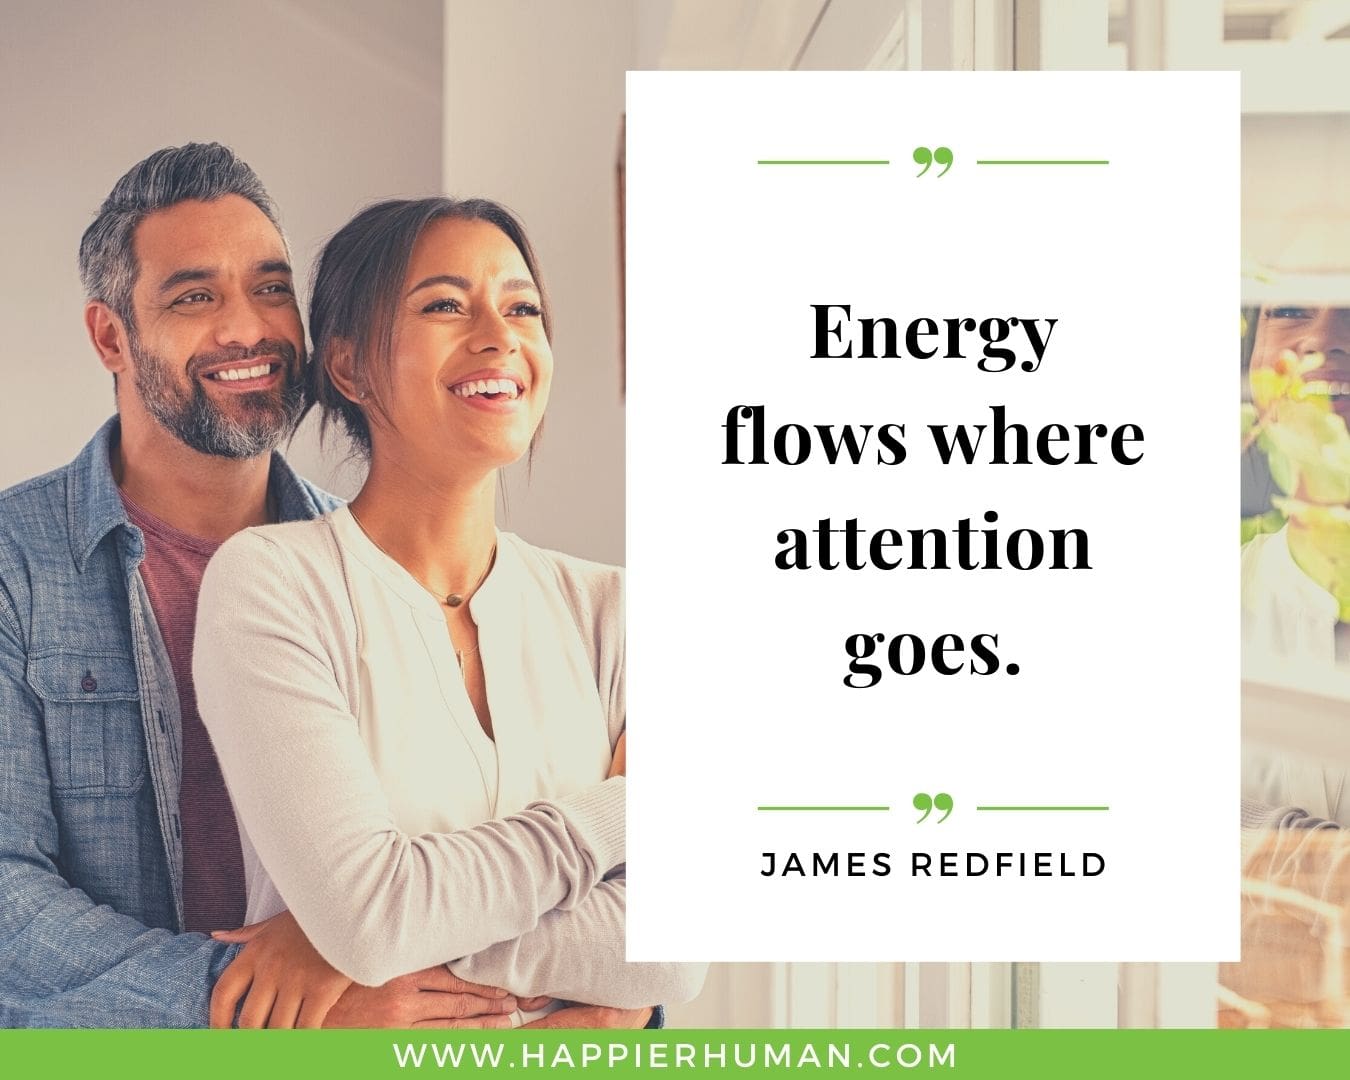 Positive Energy Quotes - “Energy flows where attention goes.” - James Redfield